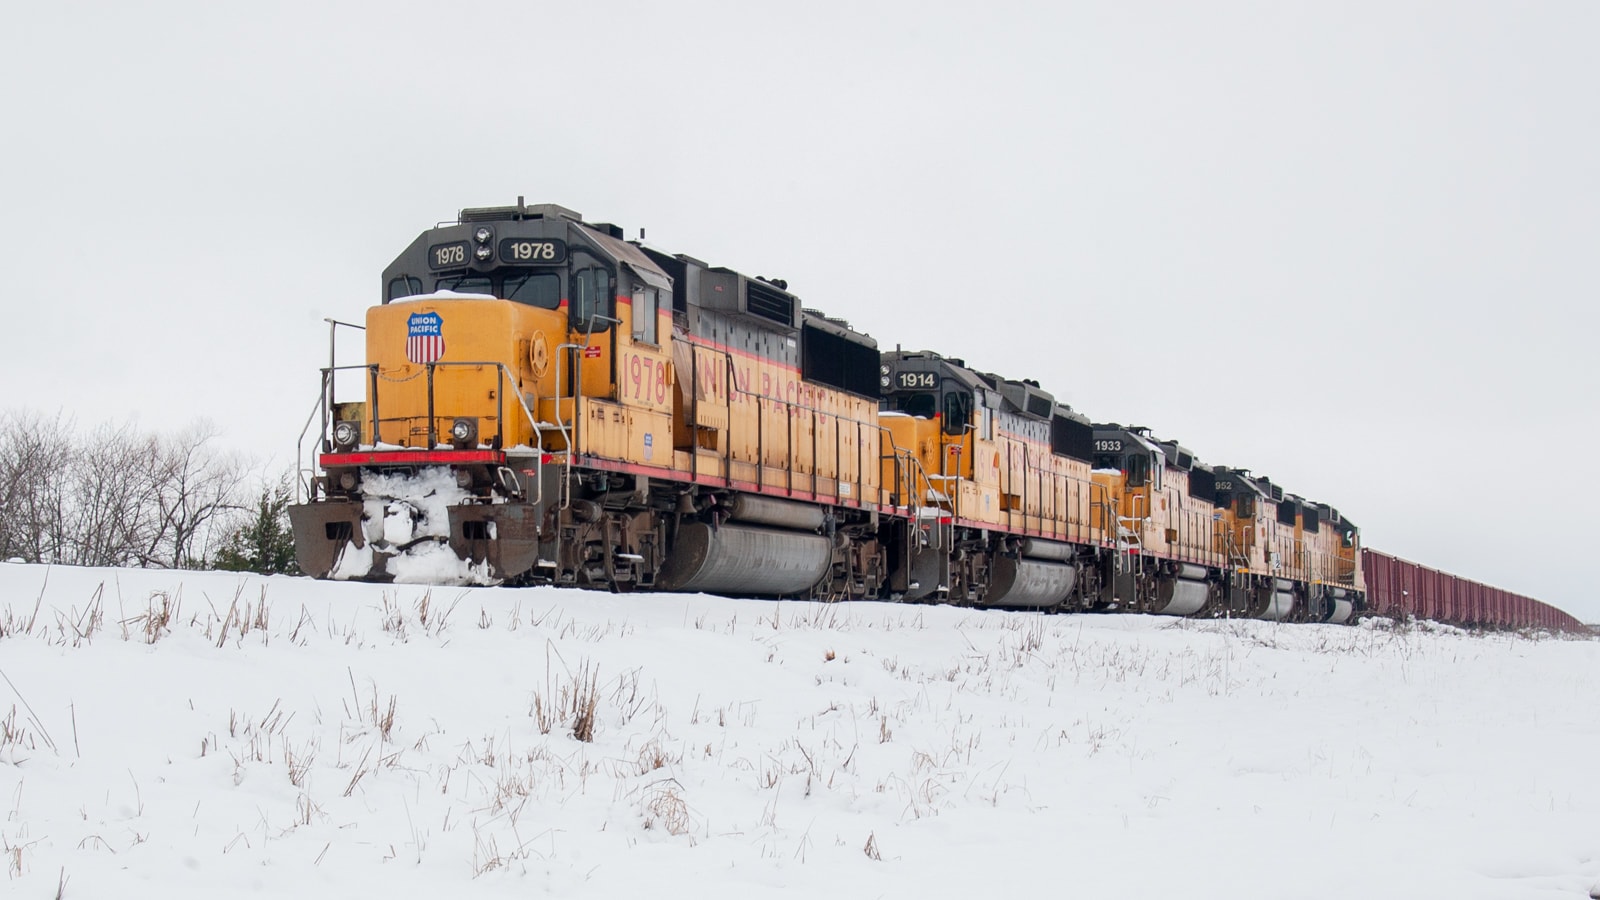 A pacific Union train in the 2010 East Texas snowstorm